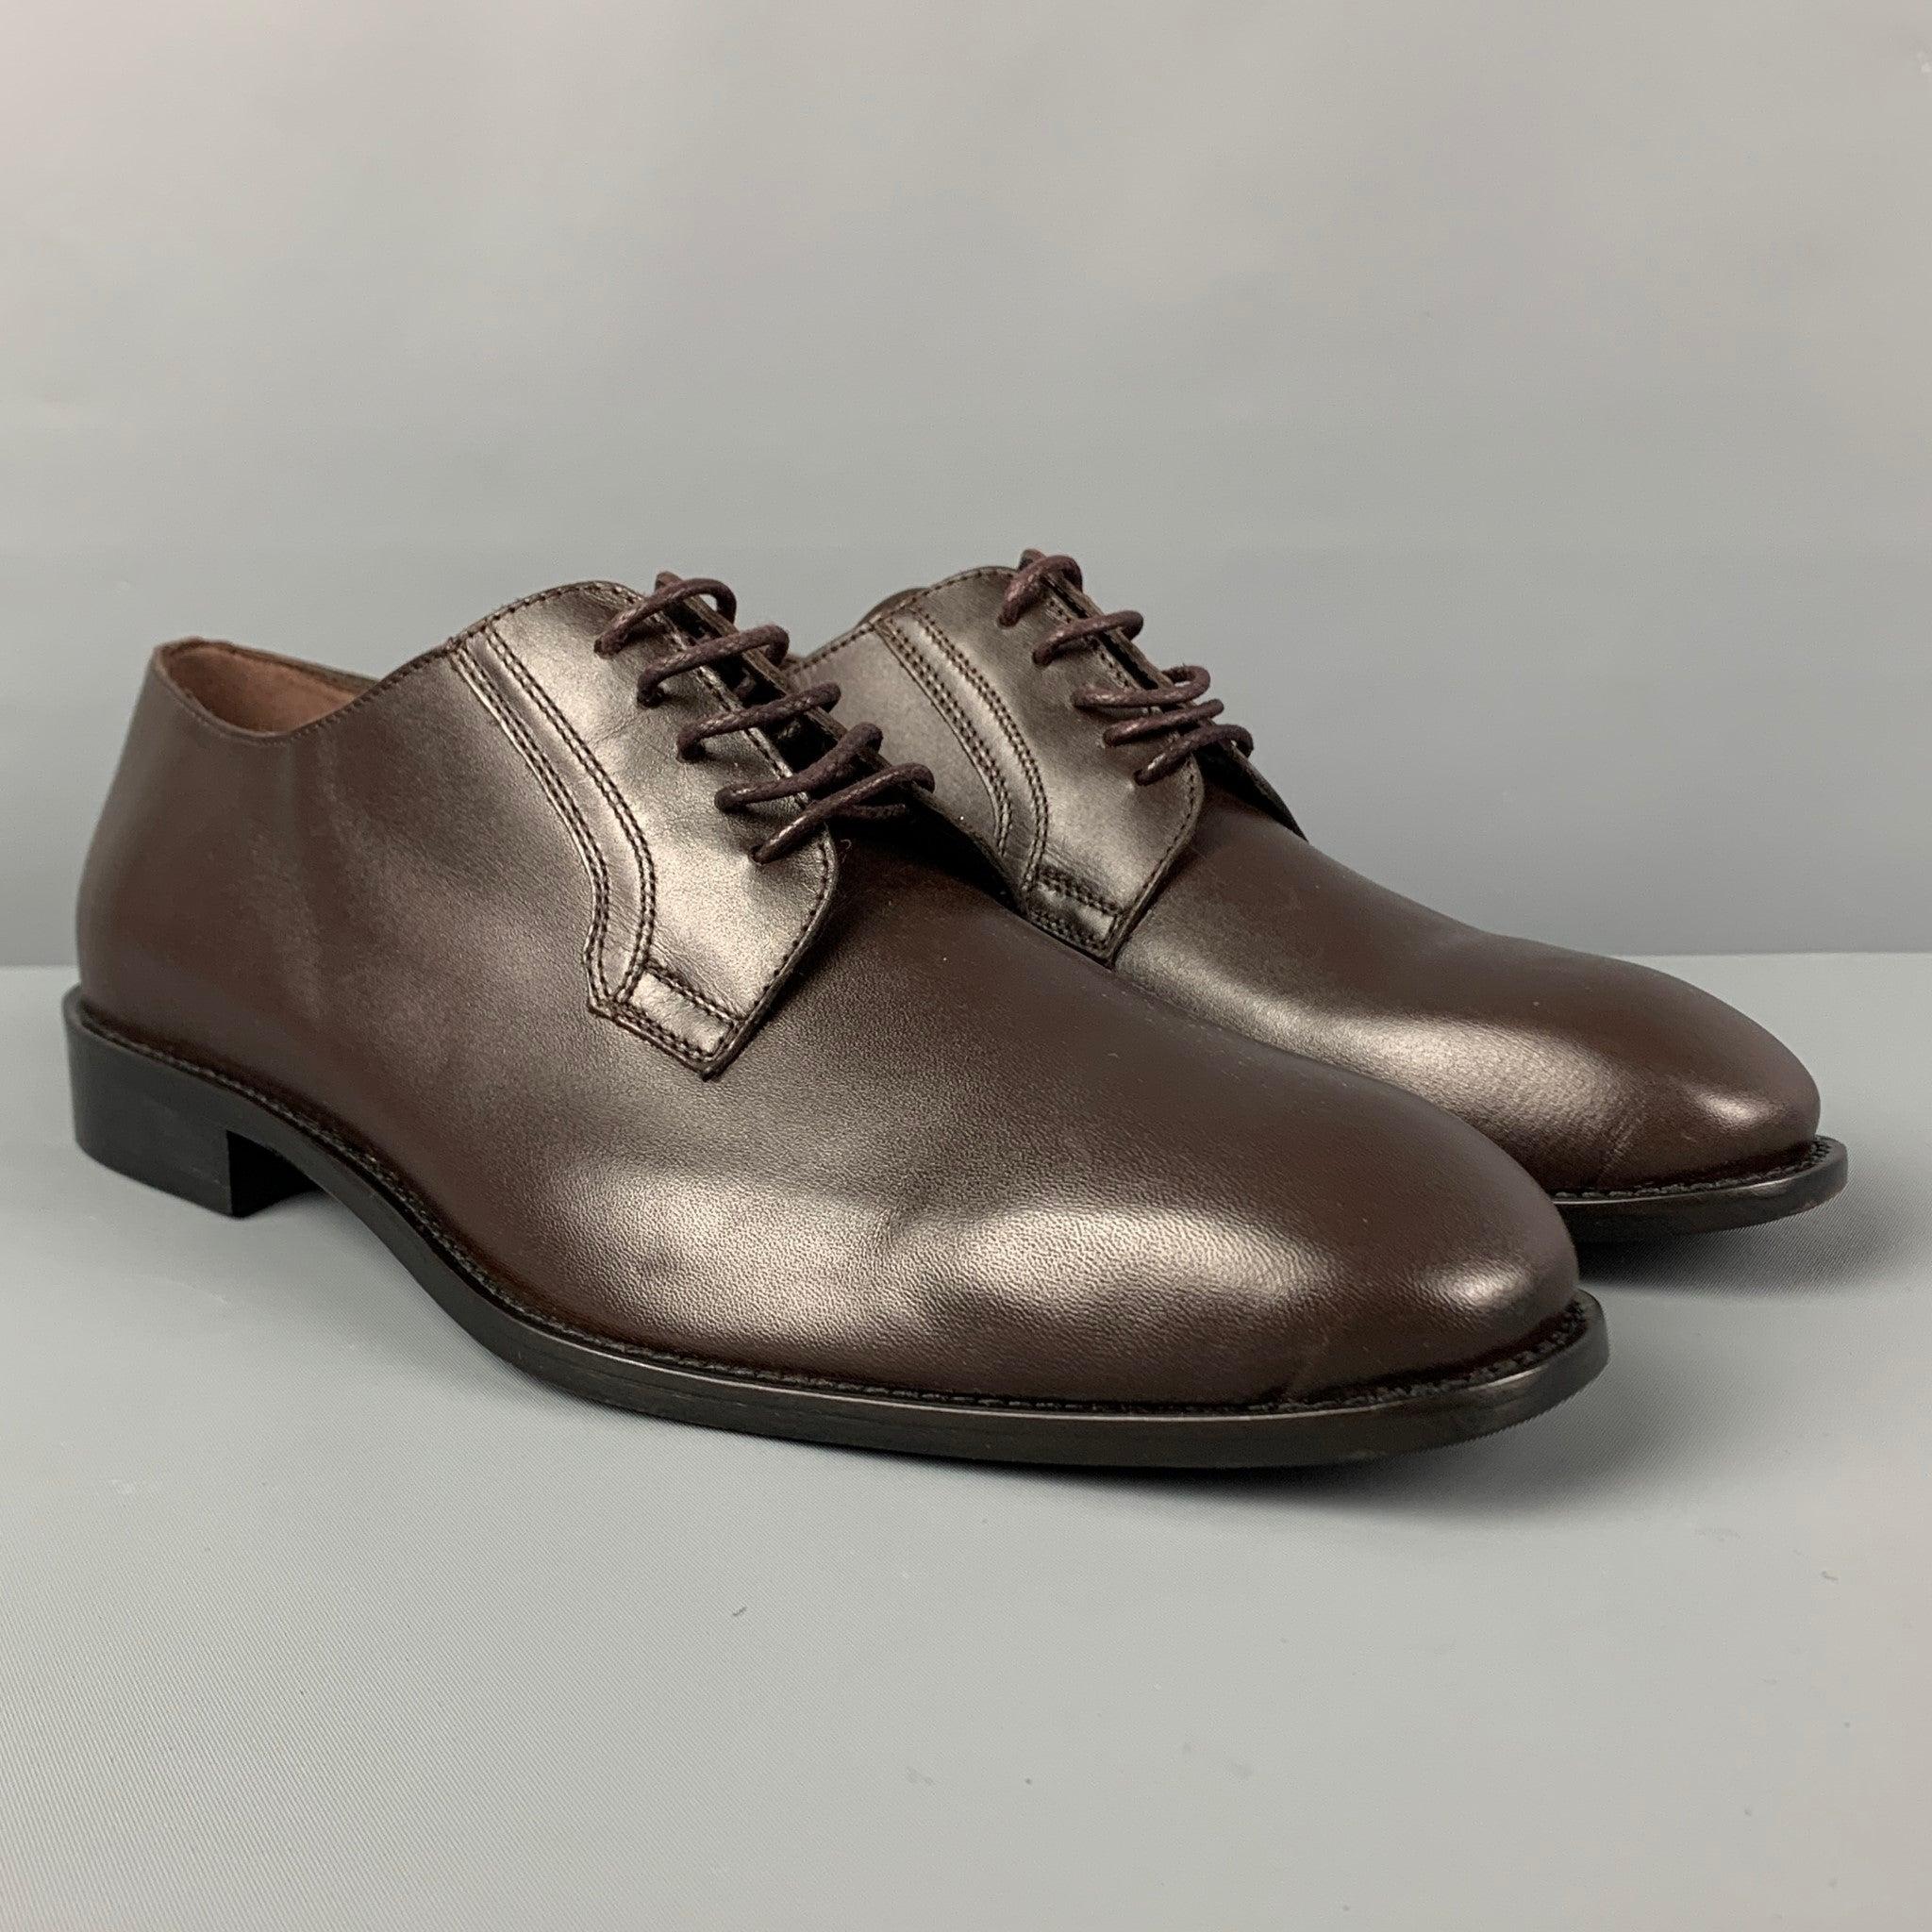 BRUNO MAGLI shoes comes in a dark brown leather featuring a classic style anda lace up closure. Includes box. Made in Italy.
Very Good
Pre-Owned Condition. 

Marked:   43Outsole: 12.25 inches  x 4.25 inches 
  
  
 
Reference: 120004
Category: Lace